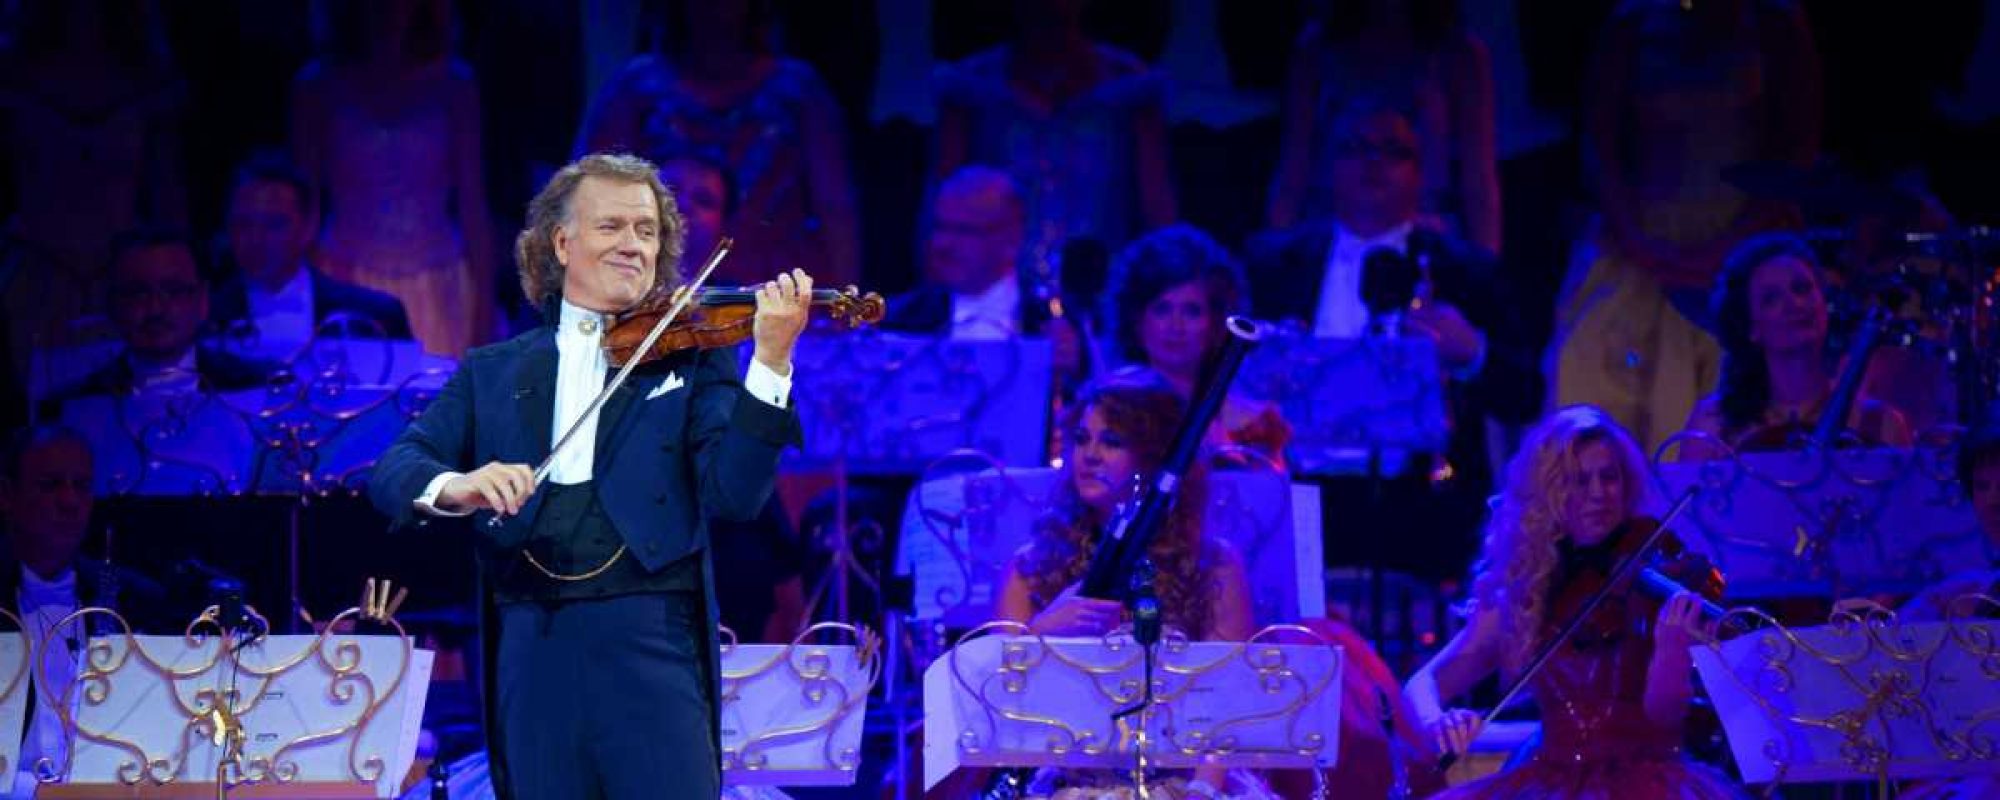 OVATION TV ACQUIRES EXCLUSIVE US BROADCAST TV RIGHTS TO  SKY ARTS’ ANDRÉ RIEU: WELCOME TO MY WORLD